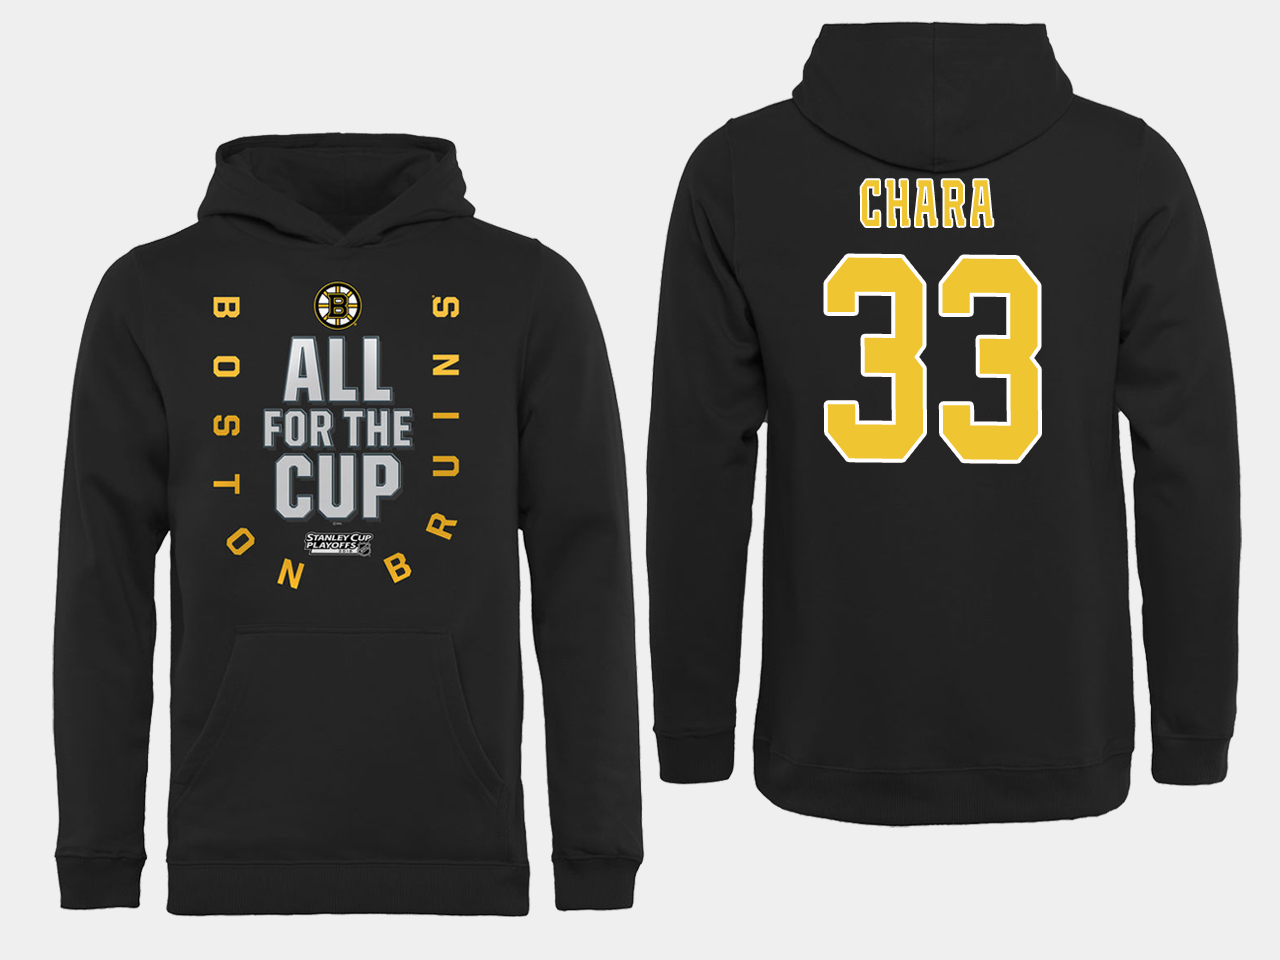 NHL Men Boston Bruins #33 Chara Black All for the Cup Hoodie->boston bruins->NHL Jersey